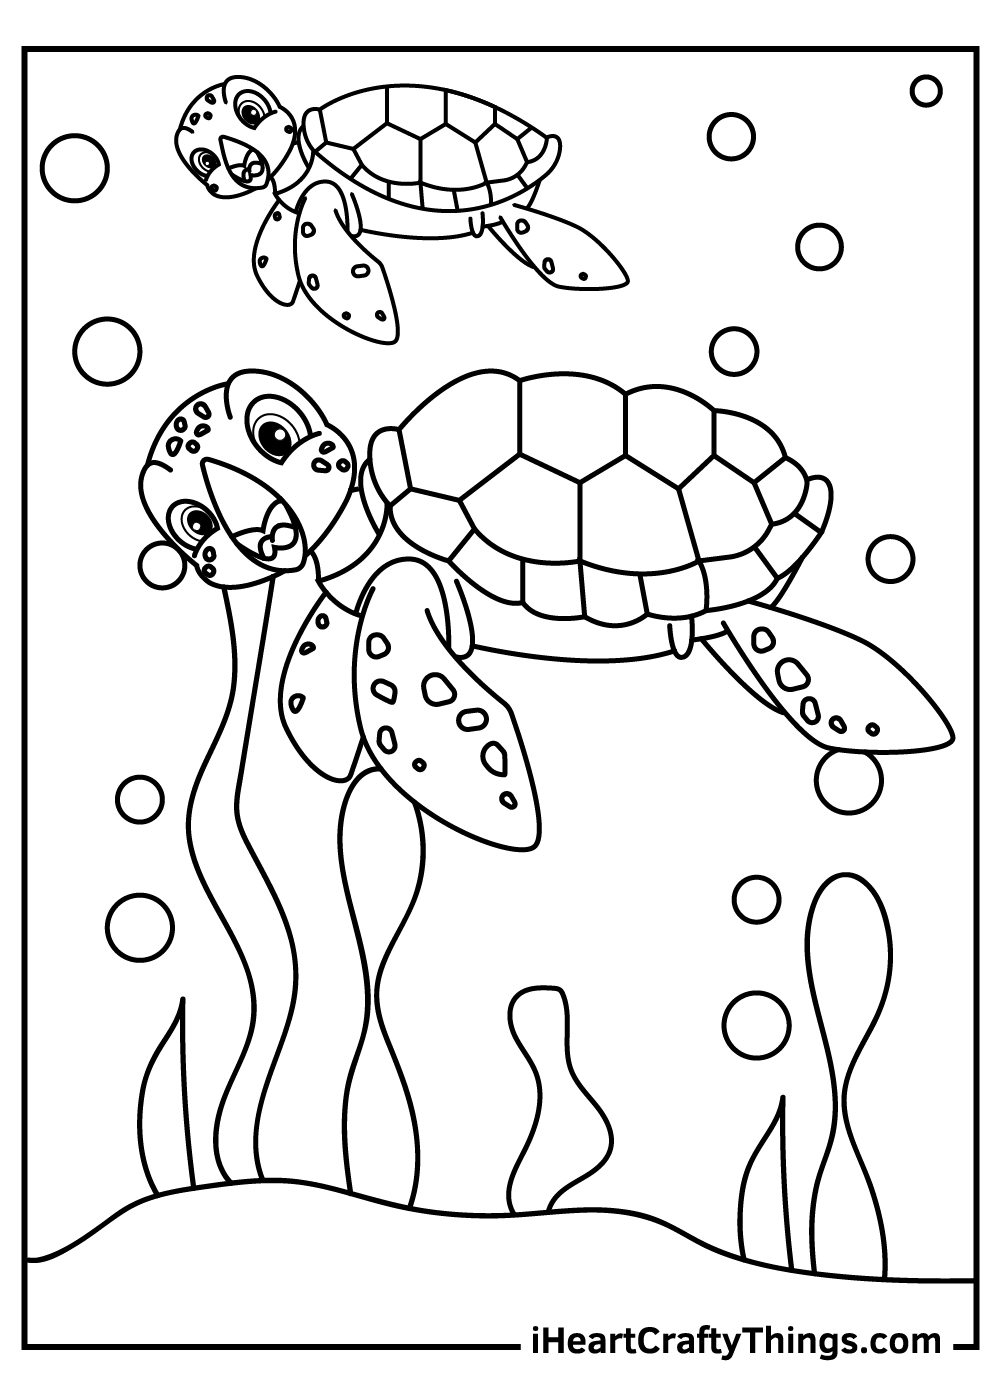 Simple animal coloring pages free printables